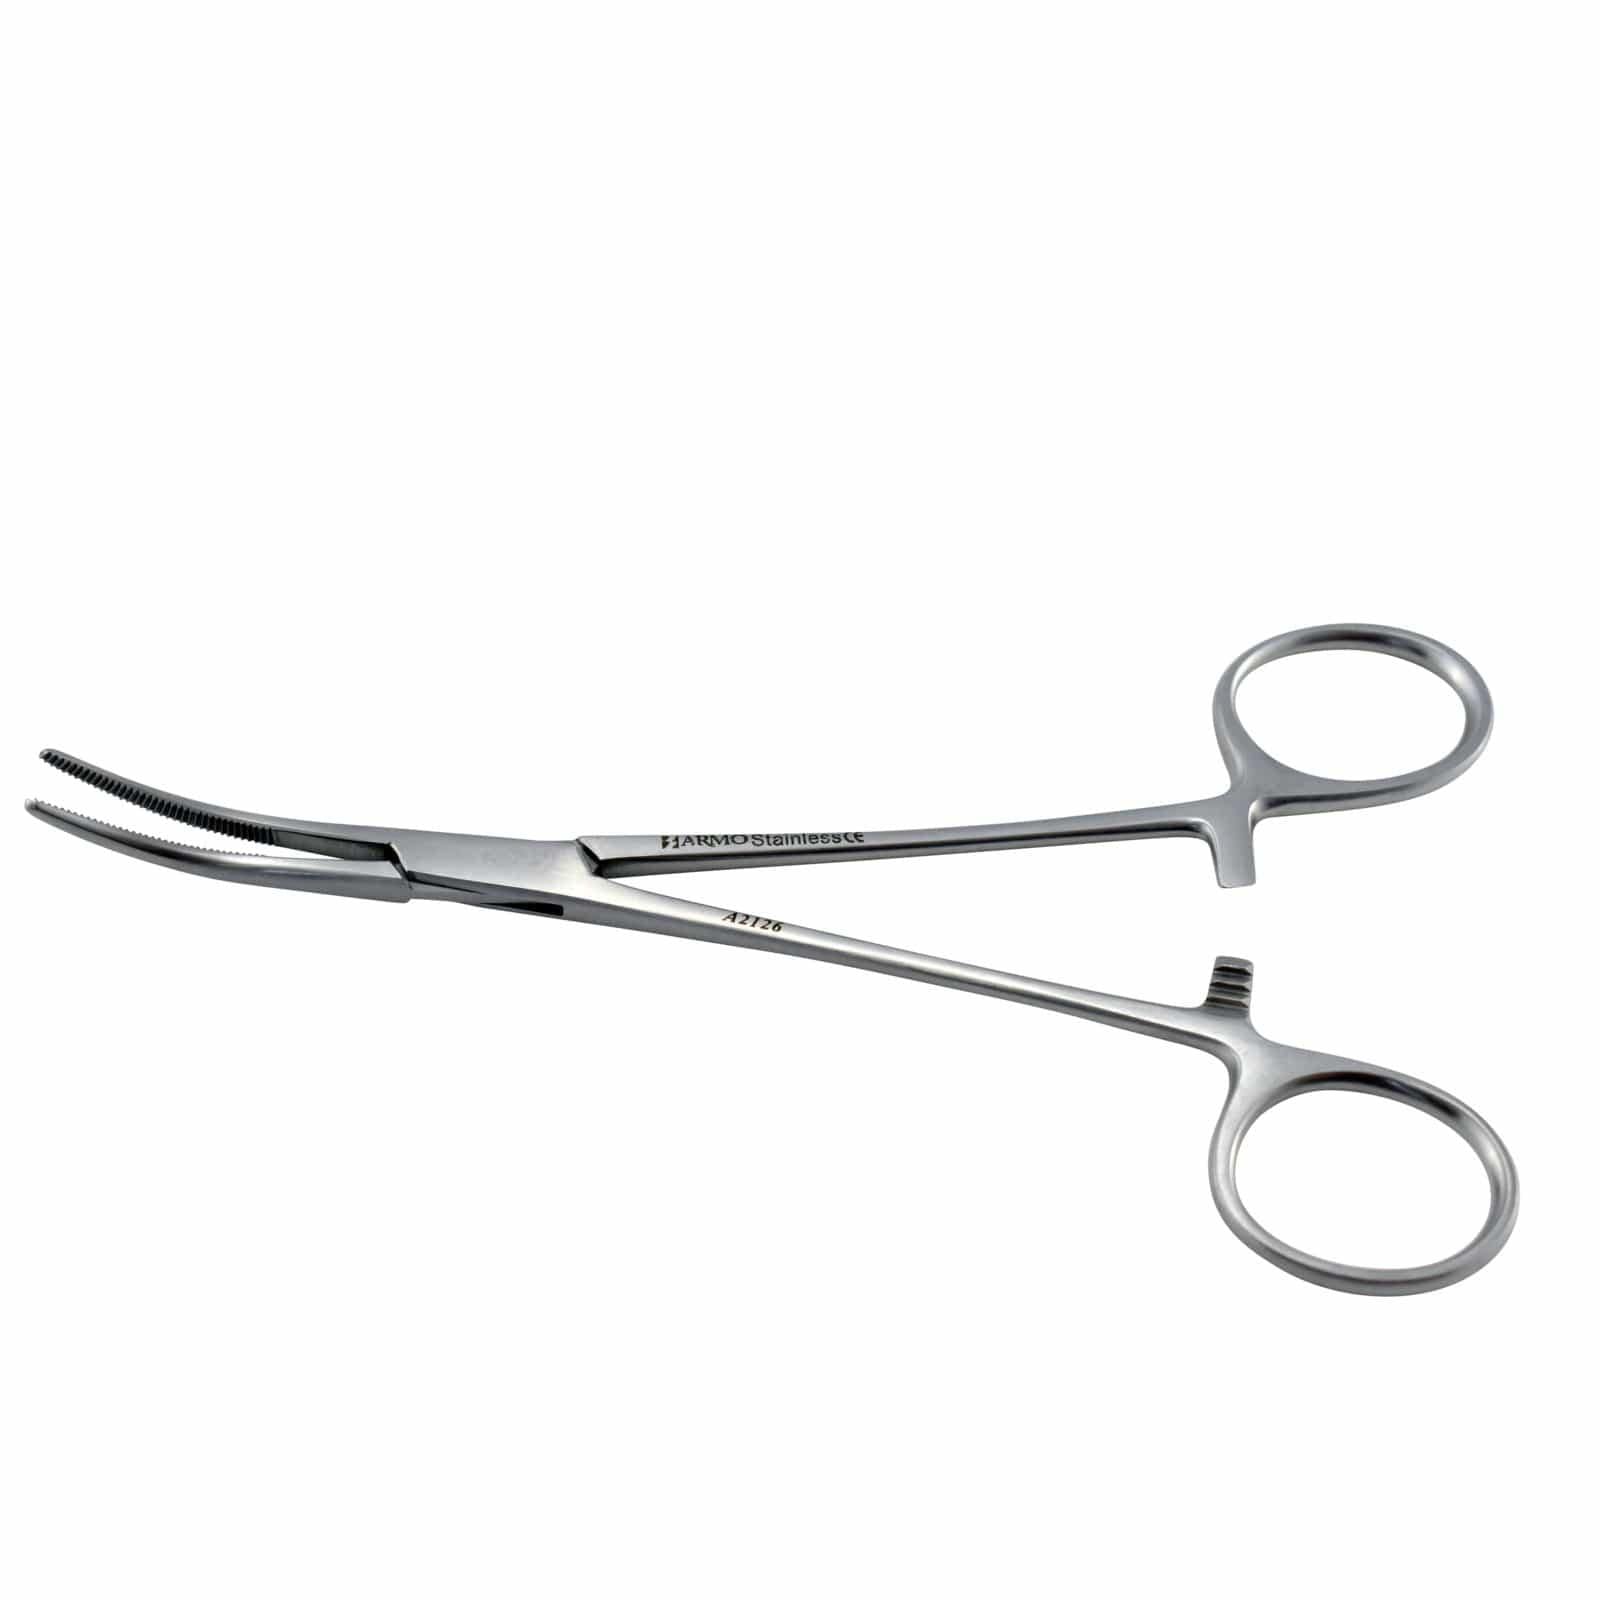 Armo Surgical Instruments 16cm / Curved Armo Kelly Artery Forceps